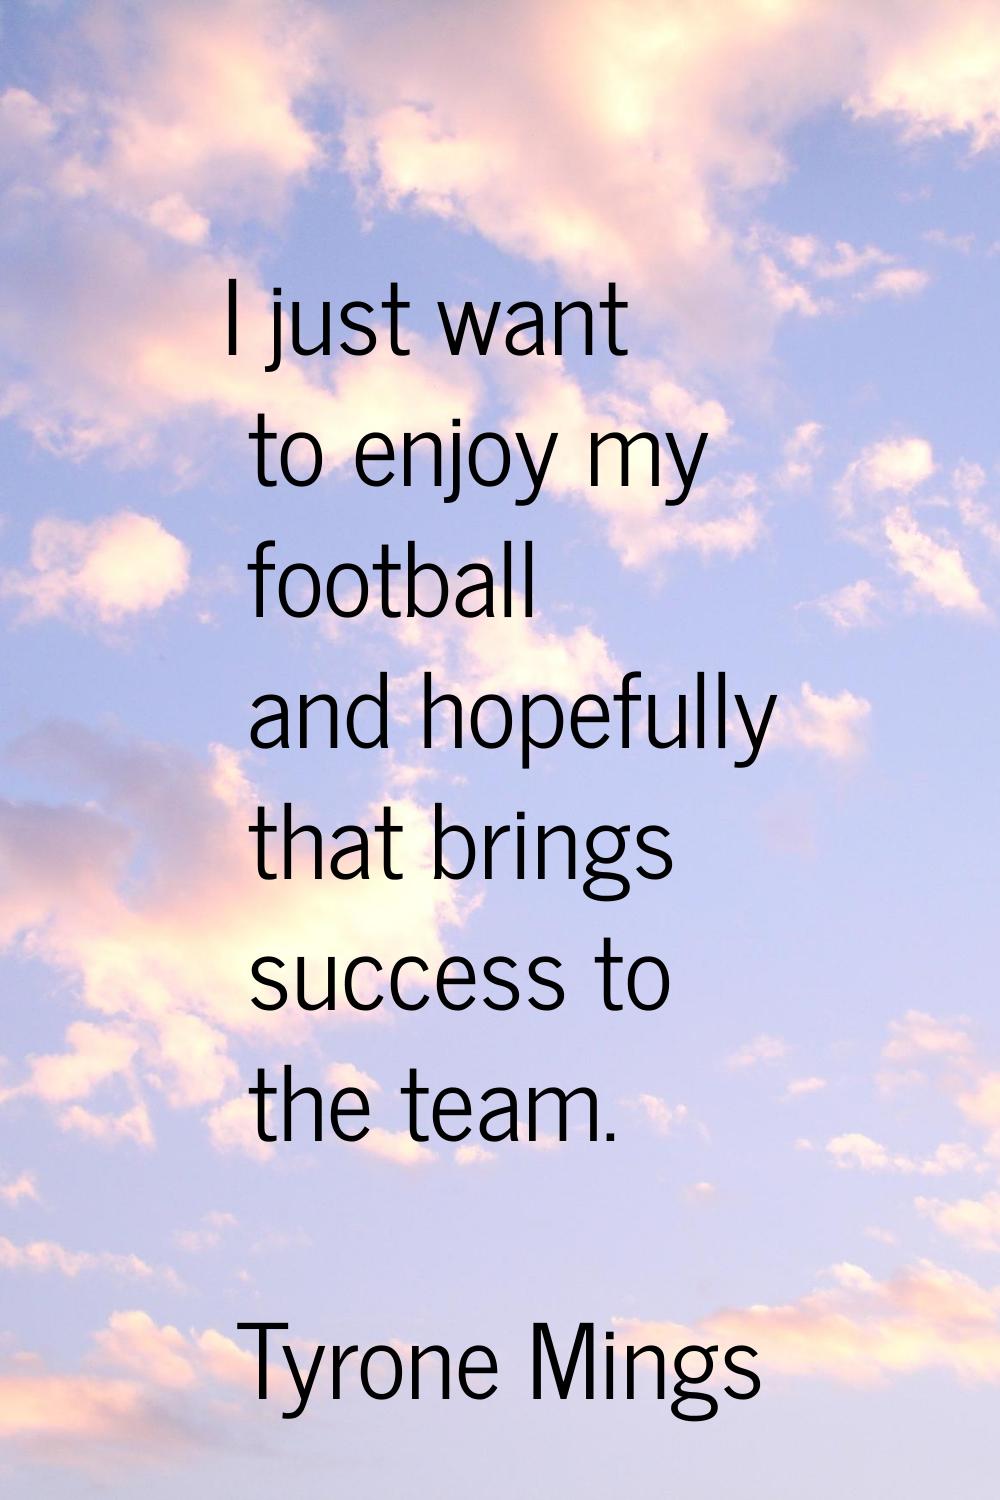 I just want to enjoy my football and hopefully that brings success to the team.